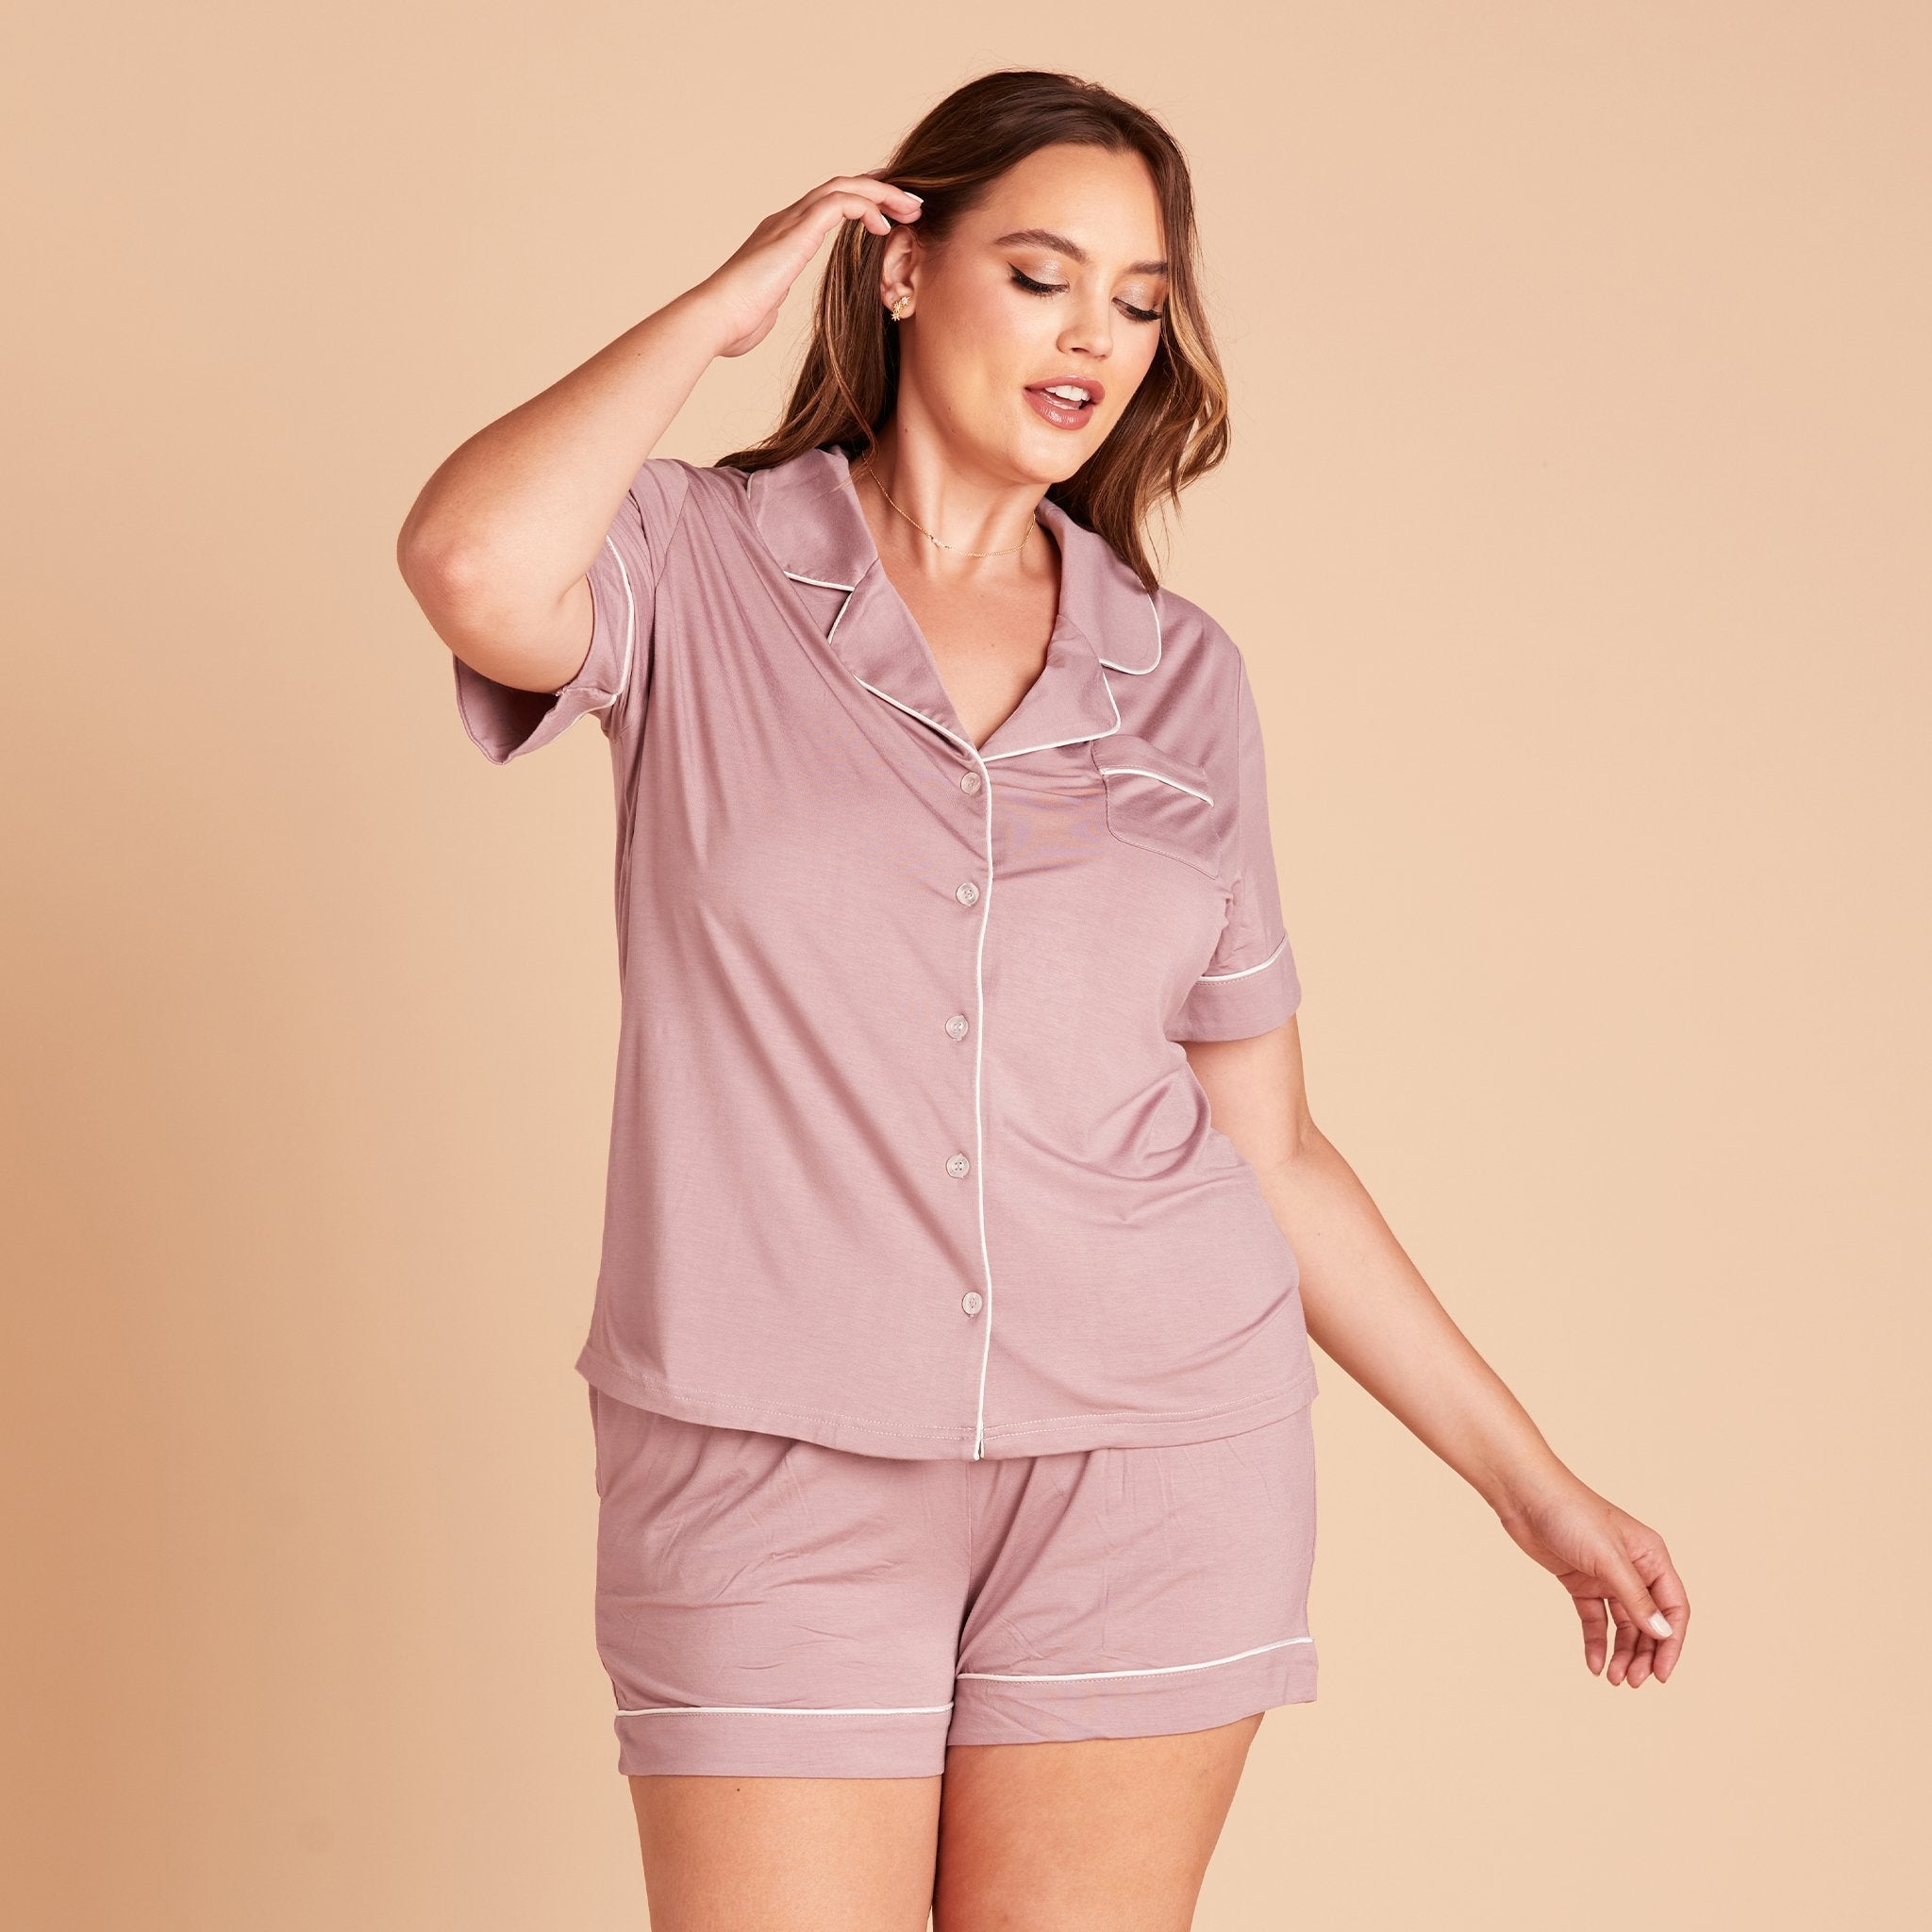 Jonny Plus Size Short Sleeve Pajama Set in mauve with white piping by Birdy Grey, front view